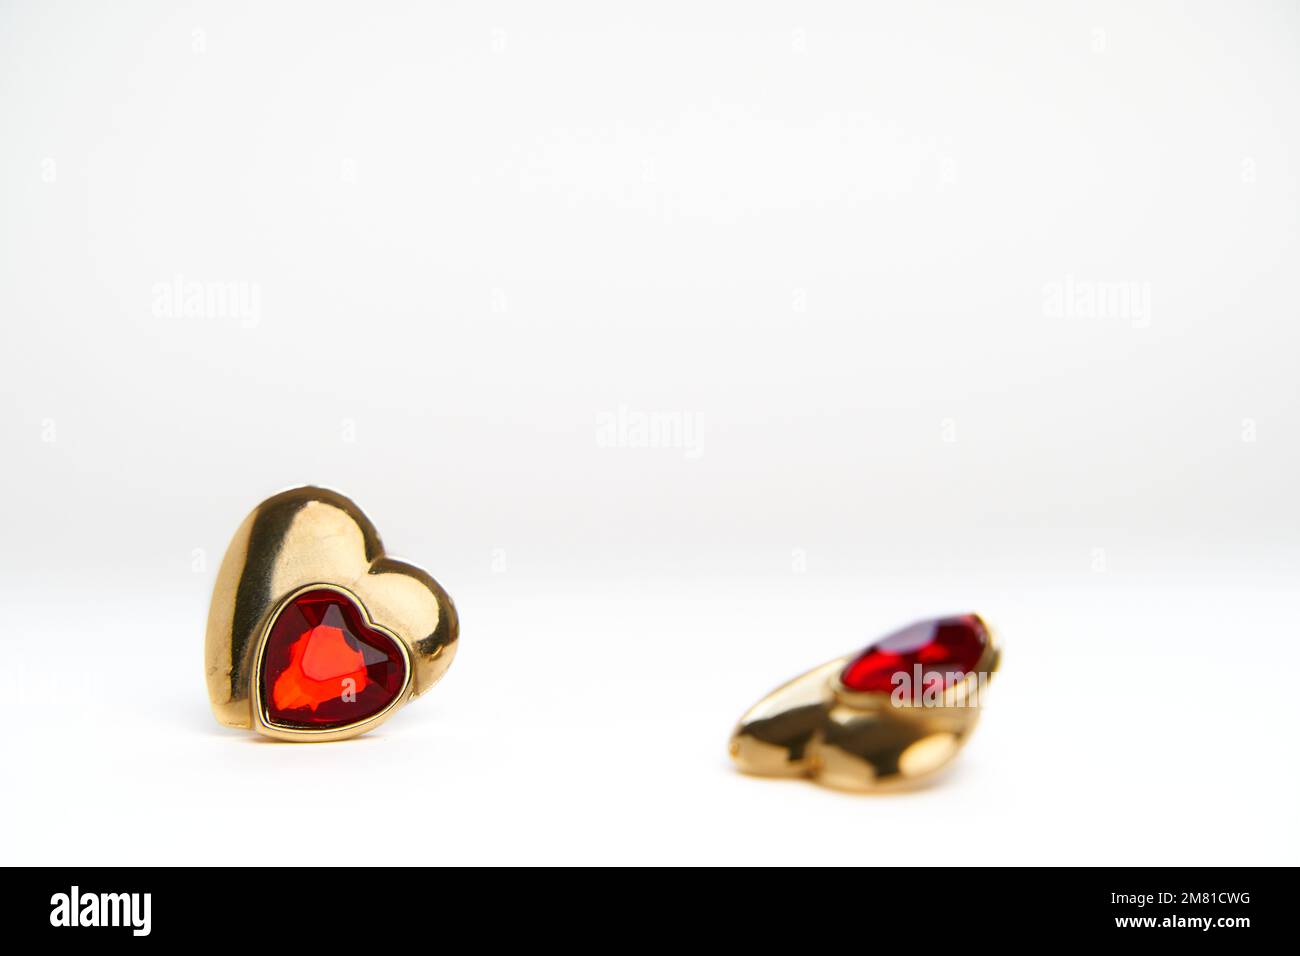 Duel concept. Sad and alone after break up concept. Heart shaped golden jewel with ruby by out of focus earring over white background Stock Photo